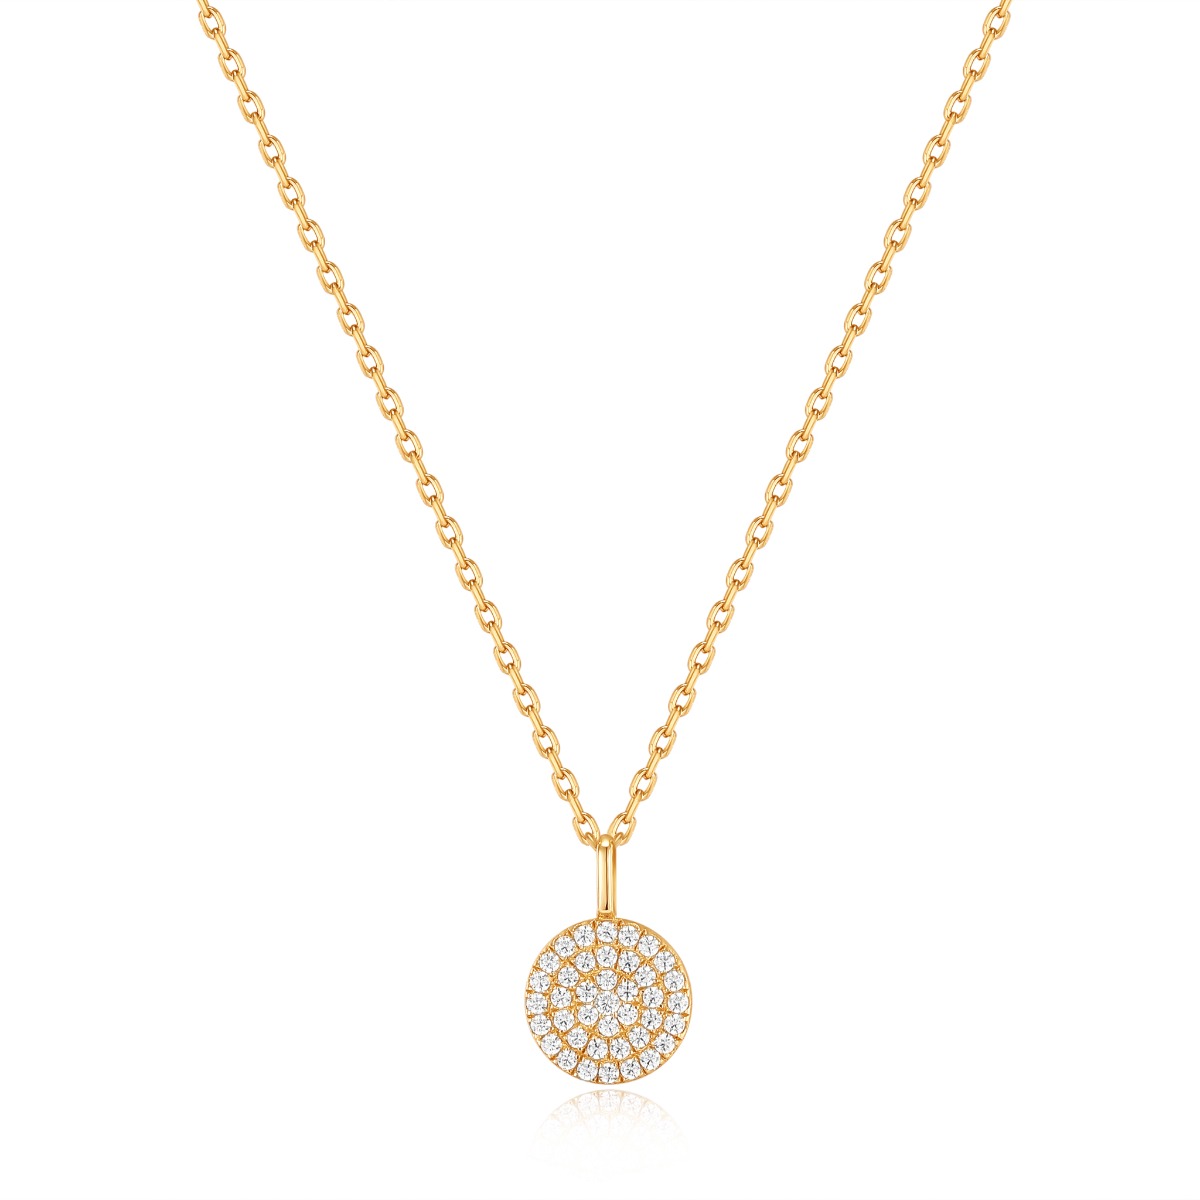 Ania Haie Glam Disc Pendant Necklace Gold Plated